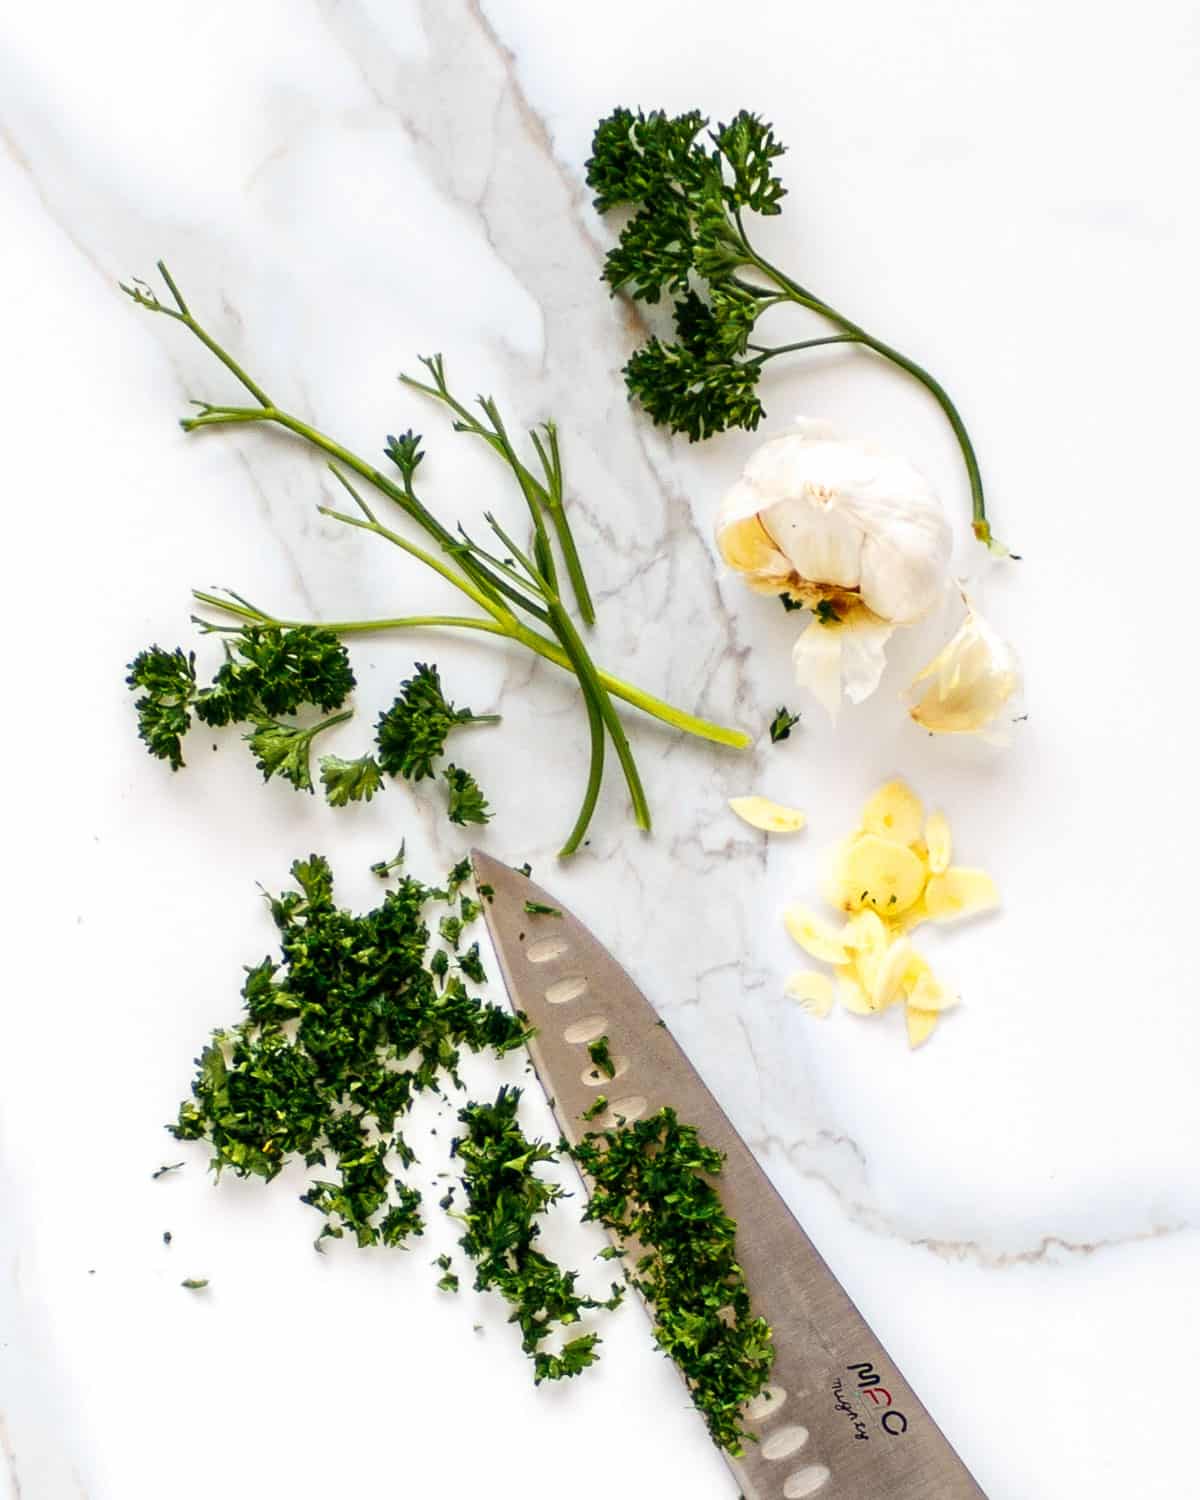 Remove parsley stems before mincing parsley.